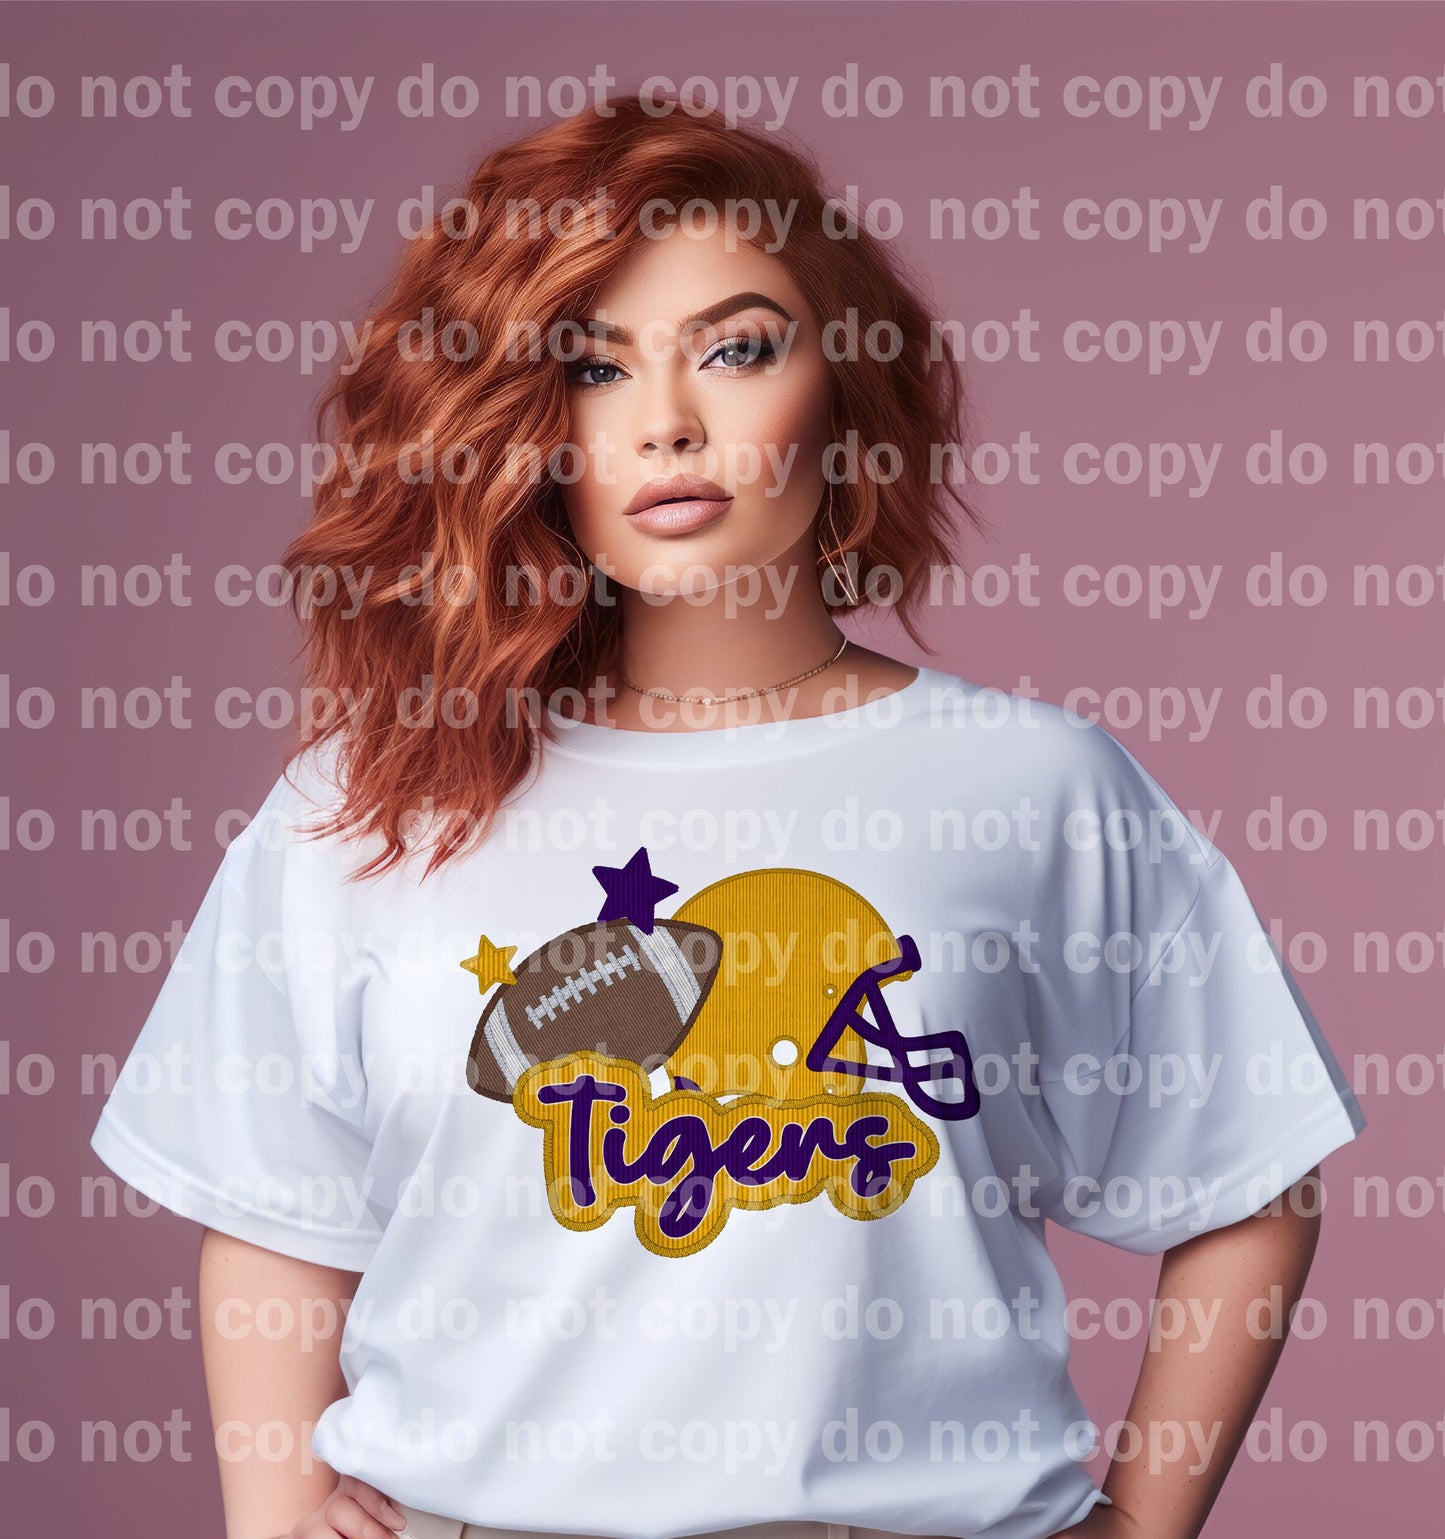 LSU Tigers Football Embroidery Dream Print or Sublimation Print